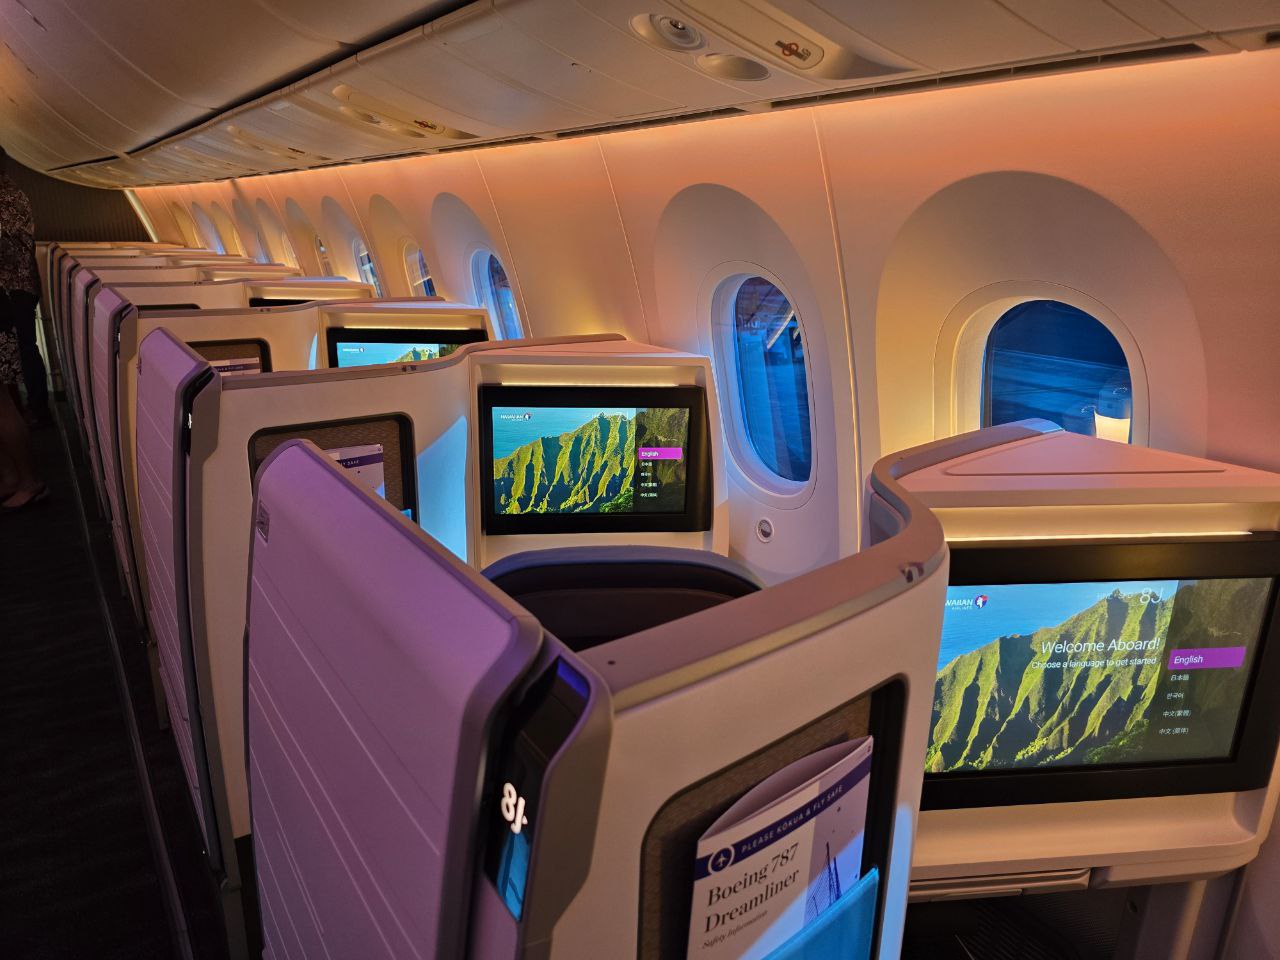 First Impressions | Onboard Hawaiian Airlines Dreamliner